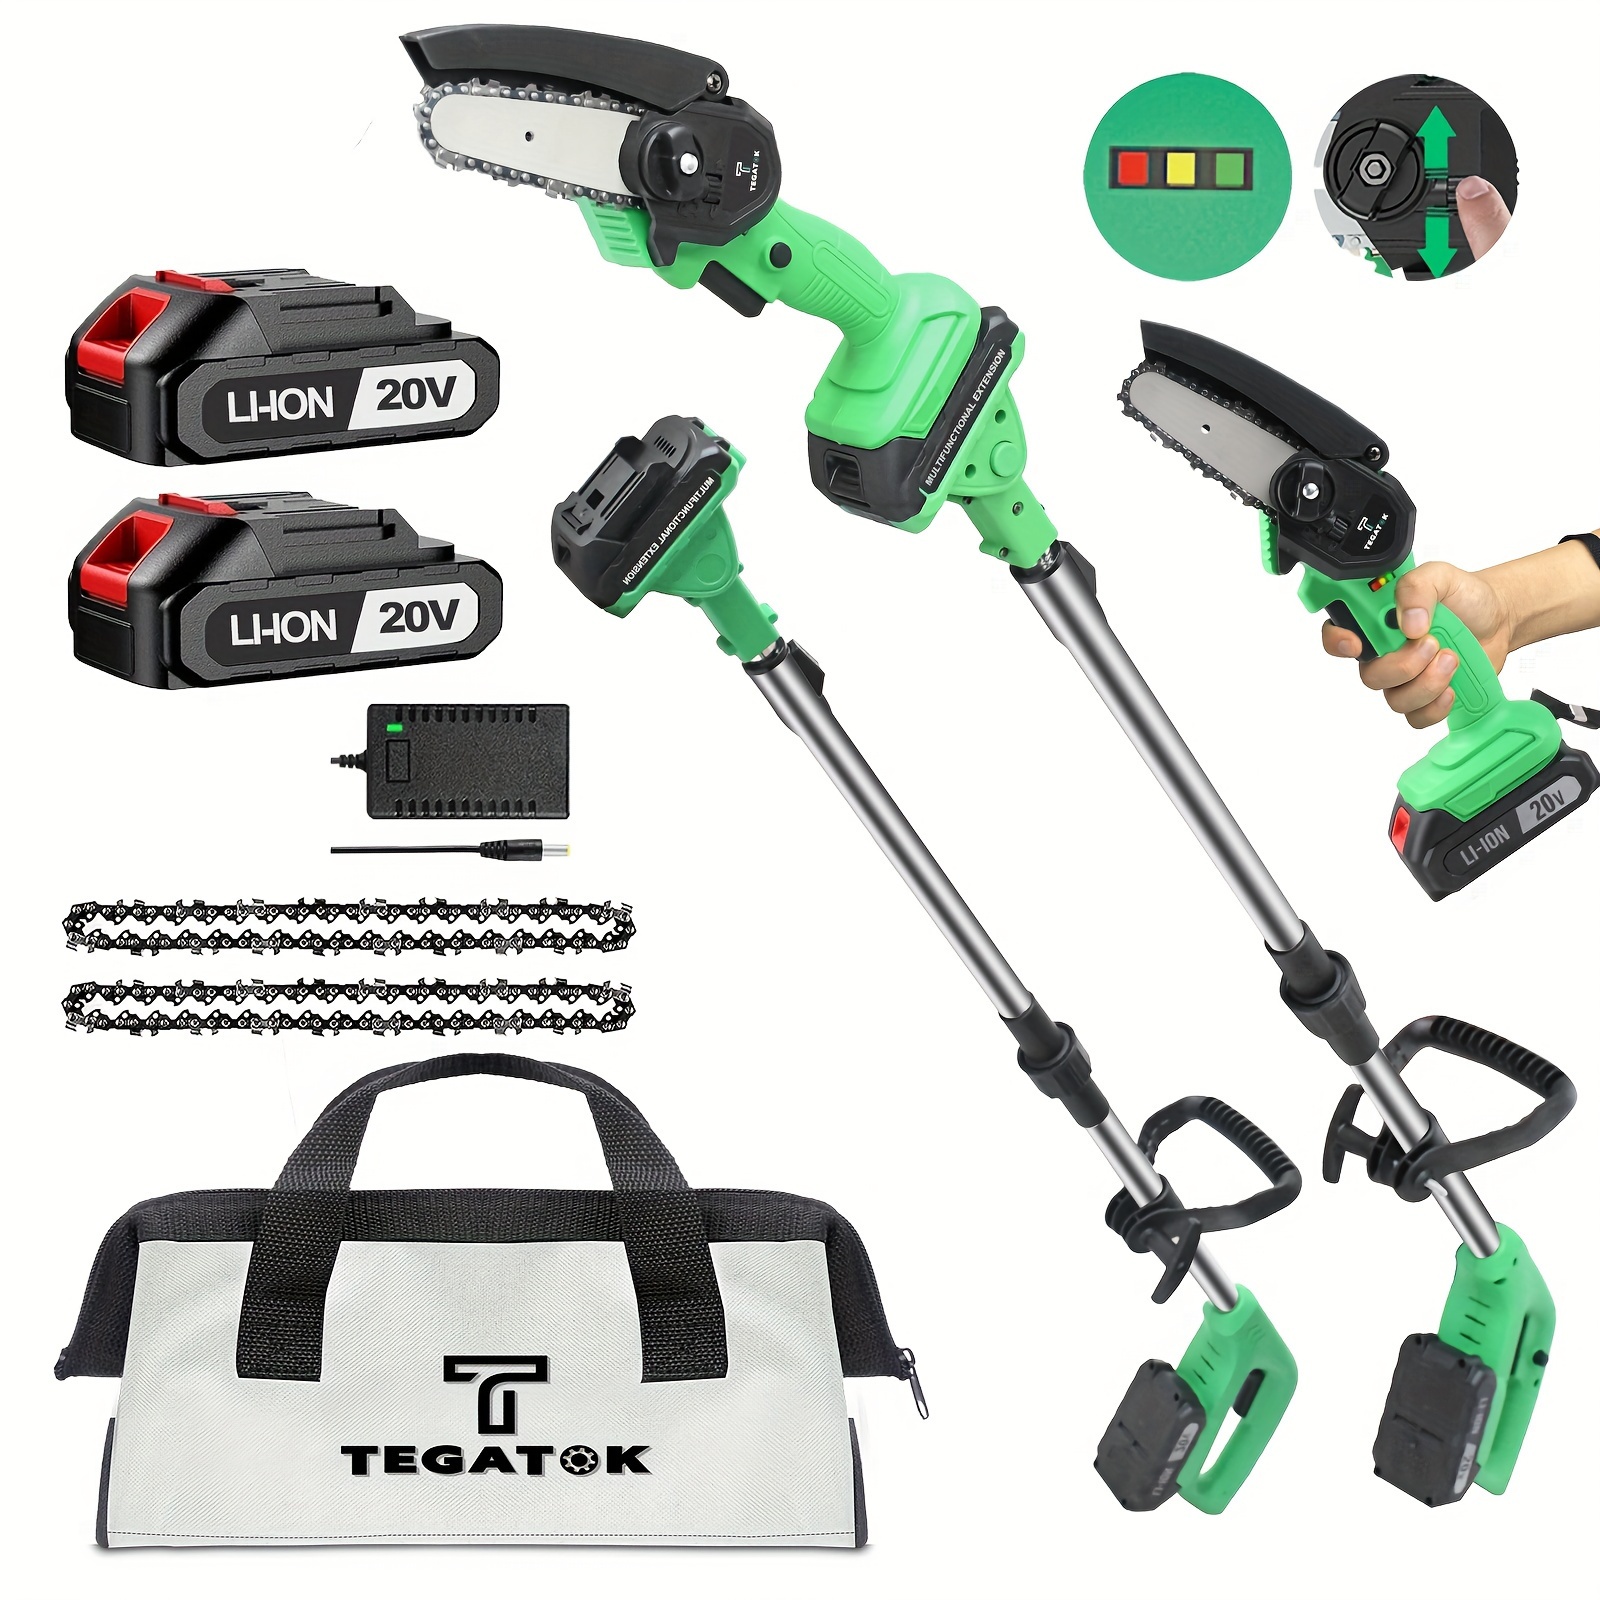 

Tegatok Cordless Pole Saw & Mini Chainsaw, 2-in-1 Electric Pole Saw With 2 Batteries And , Pole Saw Battery Powered With 5.5ft Extension Rod, Multifunctional Pole Saws For Tree Trimming